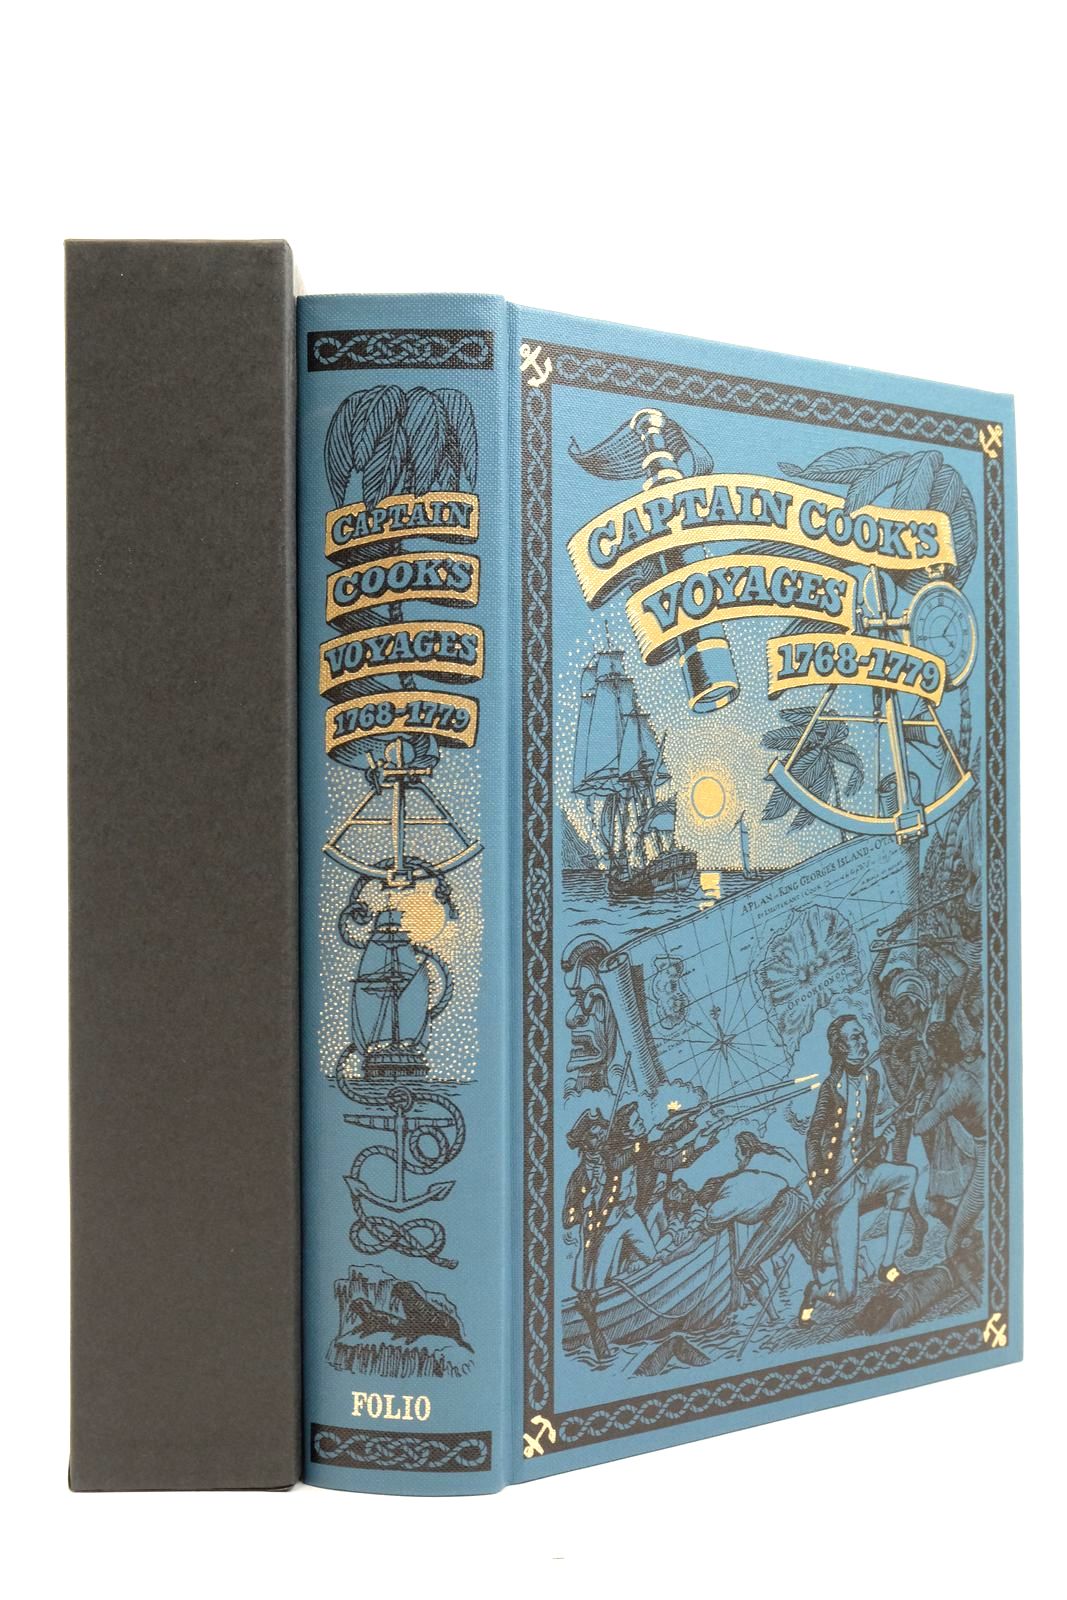 Photo of CAPTAIN COOK'S VOYAGES 1768-1779 written by Cook, Captain Williams, Glyndwr published by Folio Society (STOCK CODE: 2138178)  for sale by Stella & Rose's Books